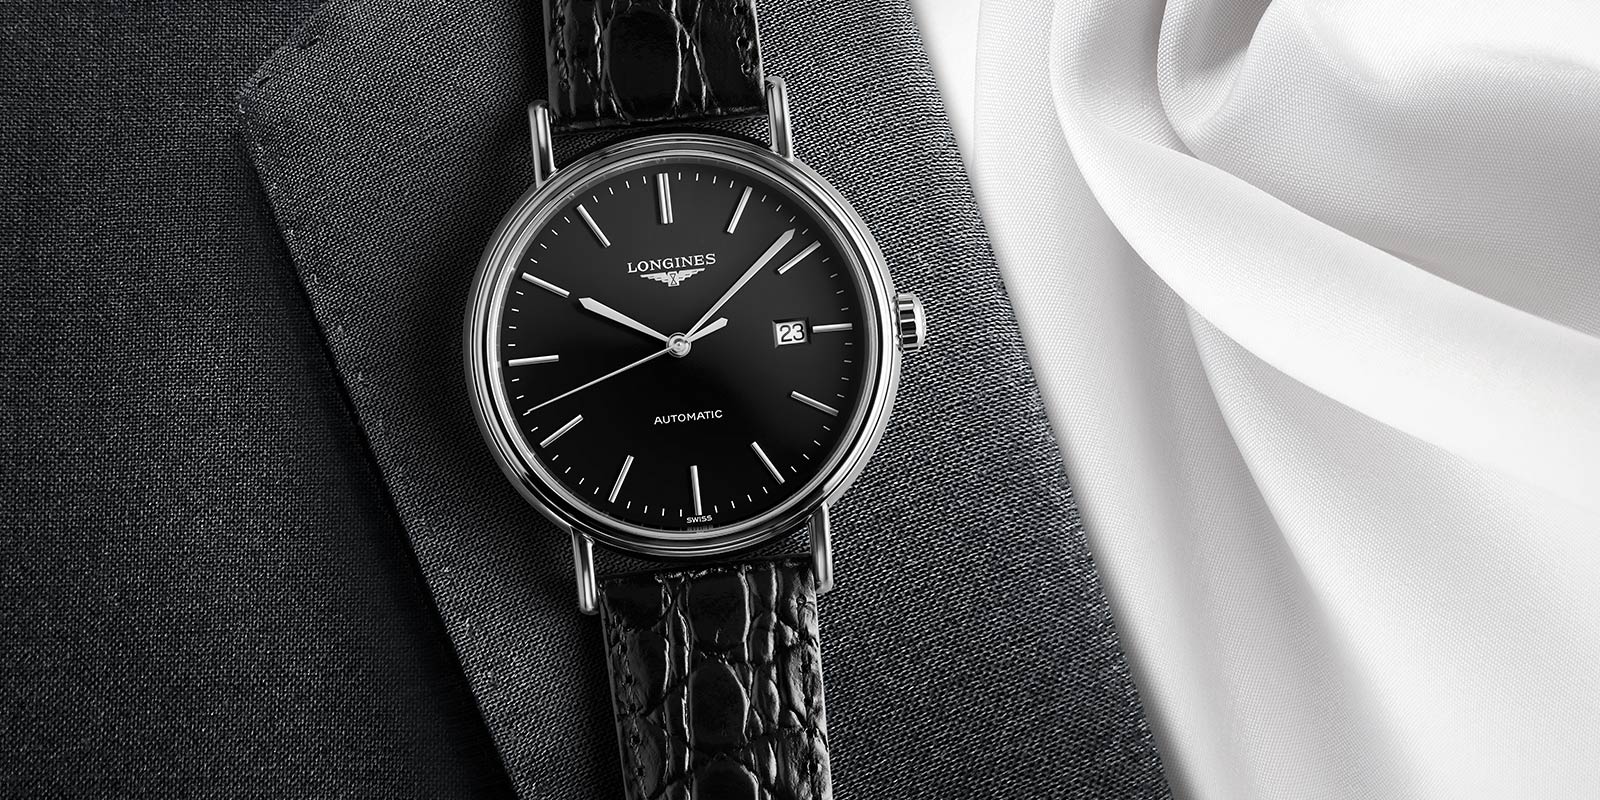 A Deeper Look Into Longines' Collections